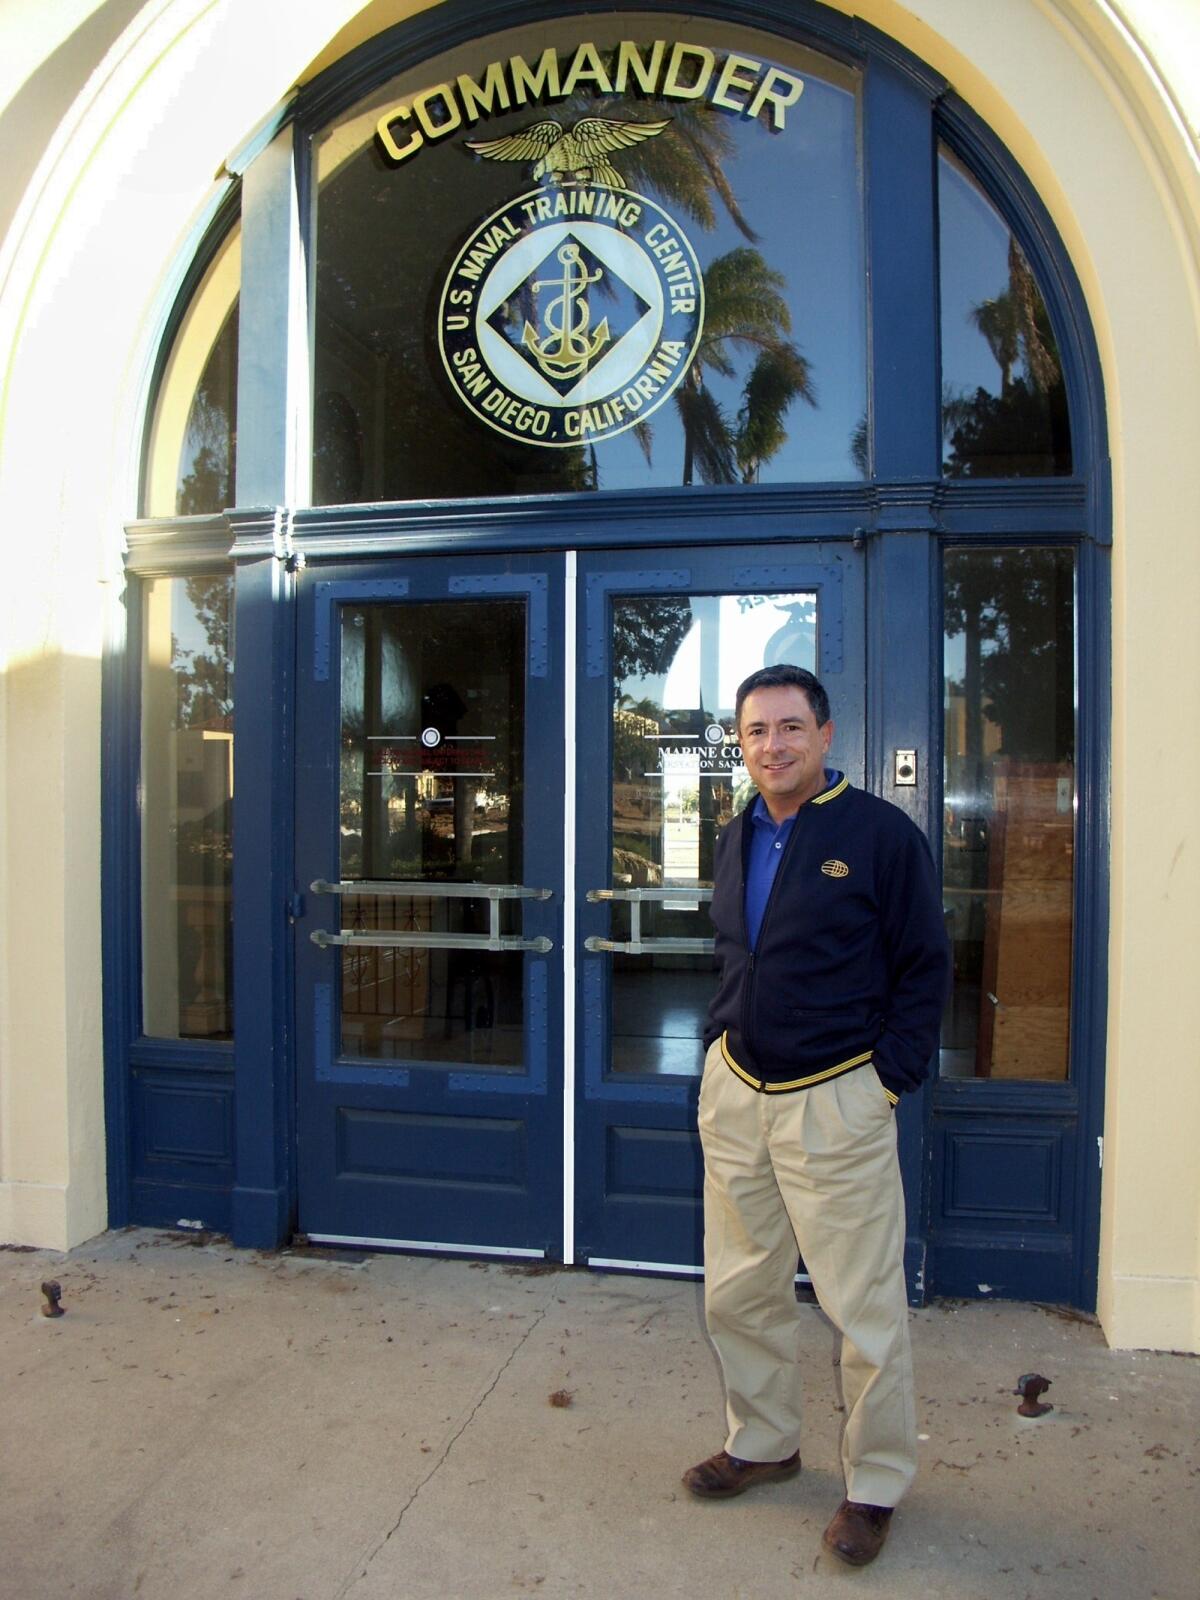 Alan Ziter at the Naval Training Center's command center in Liberty Station